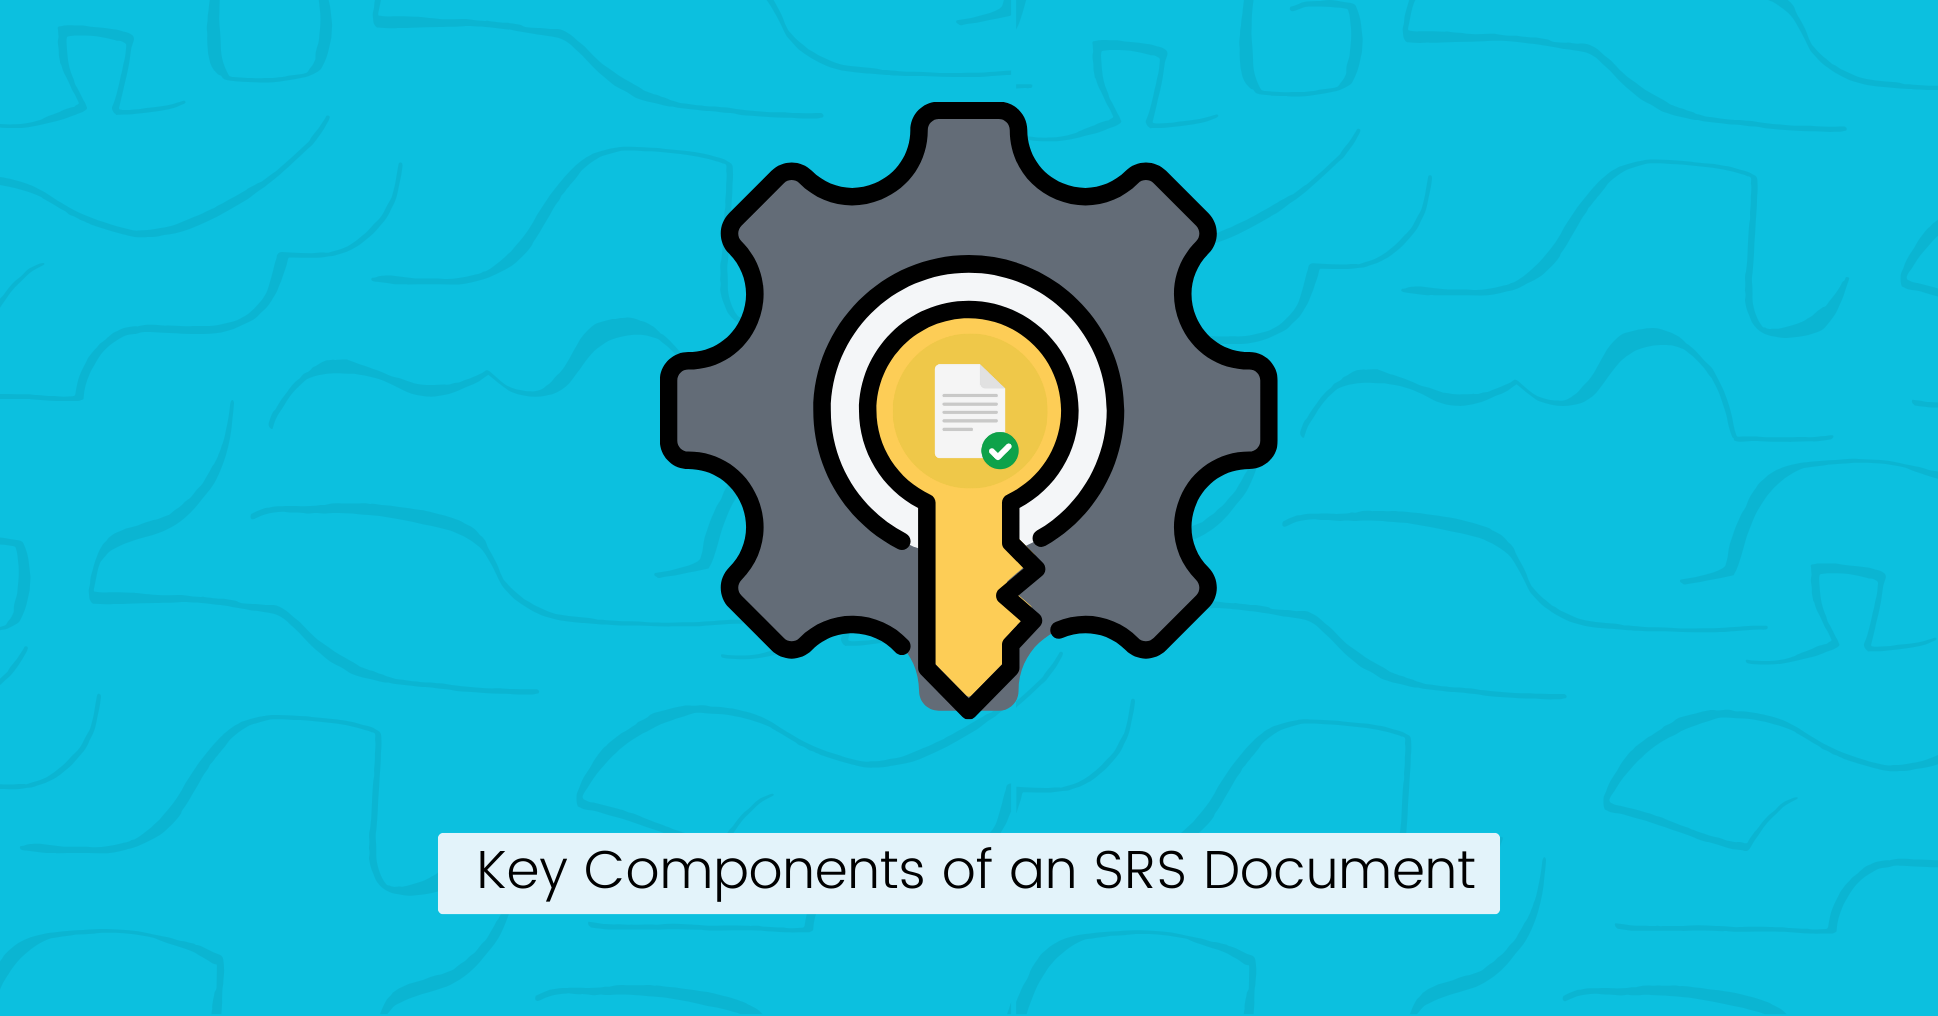 Key Components of an SRS Document